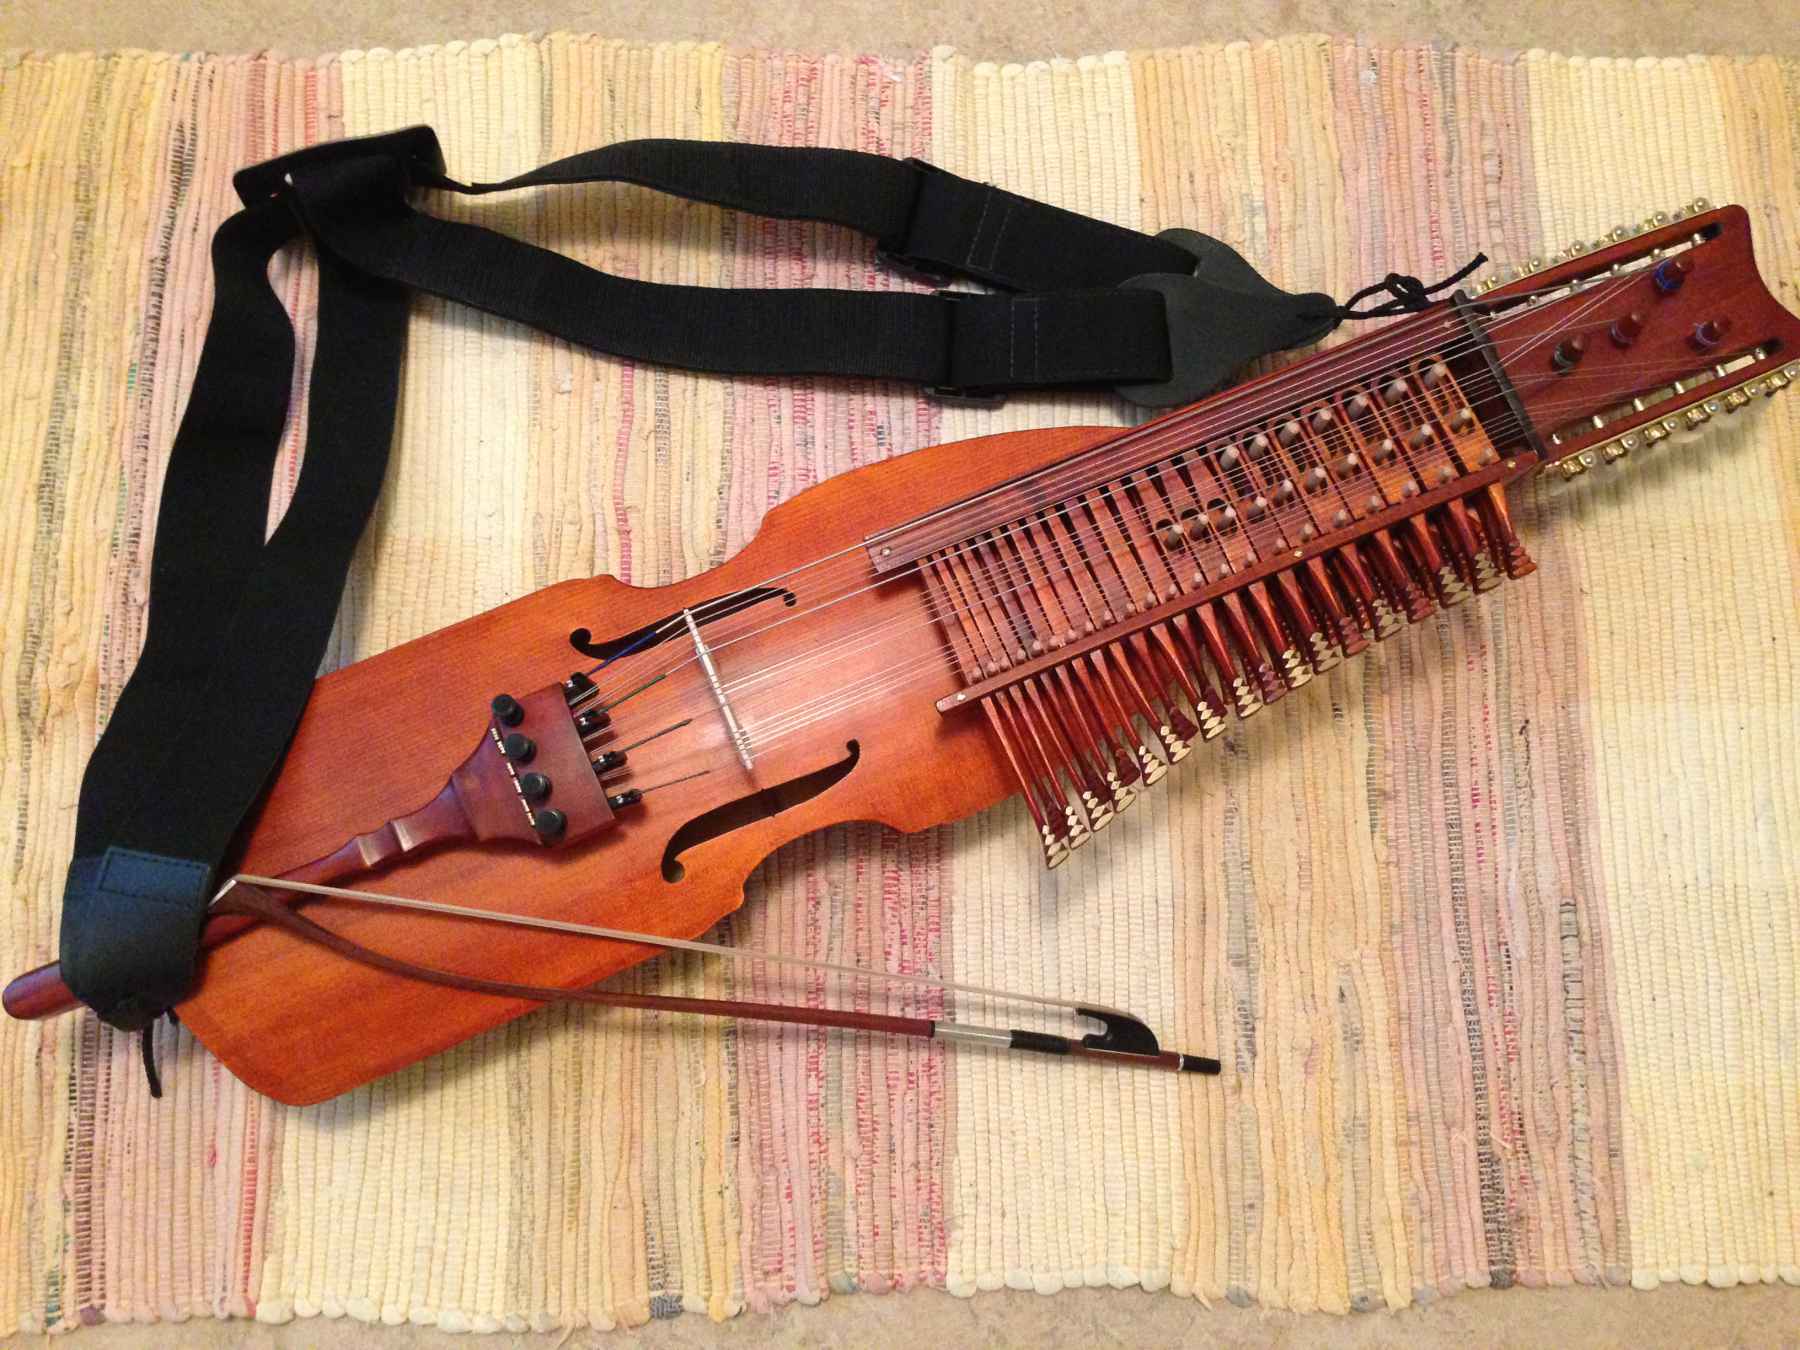 Exceptional Musical Instruments We Bet You Have Never Heard About ...